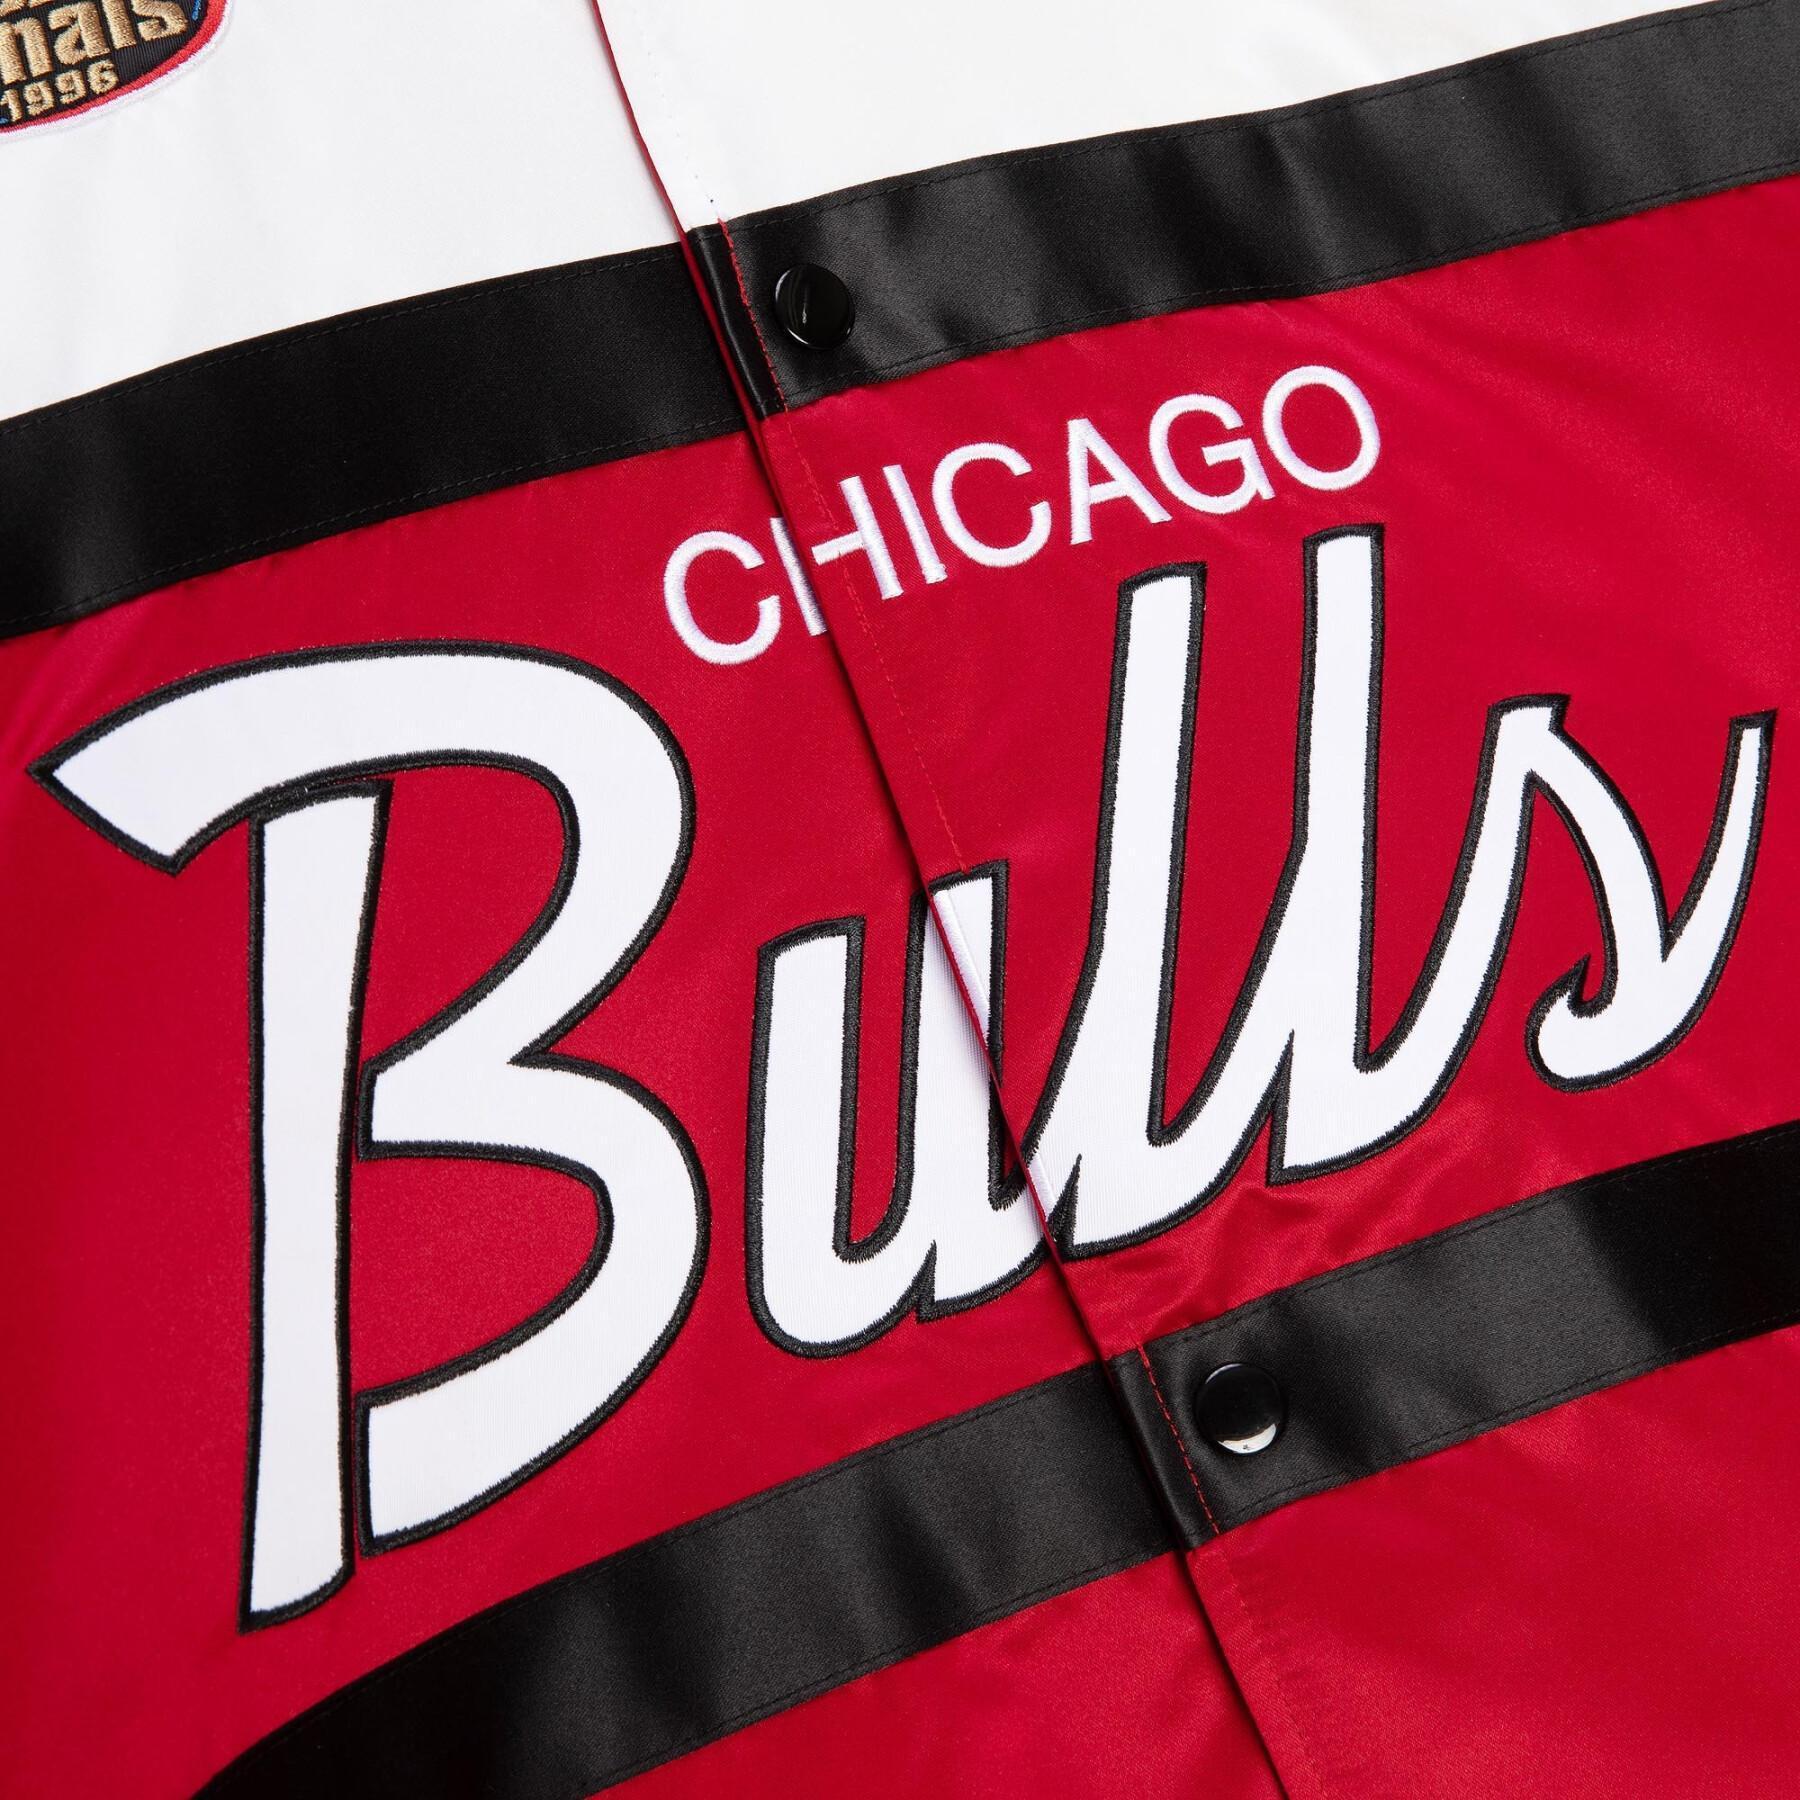 Sweat jacket with buttons Chicago Bulls